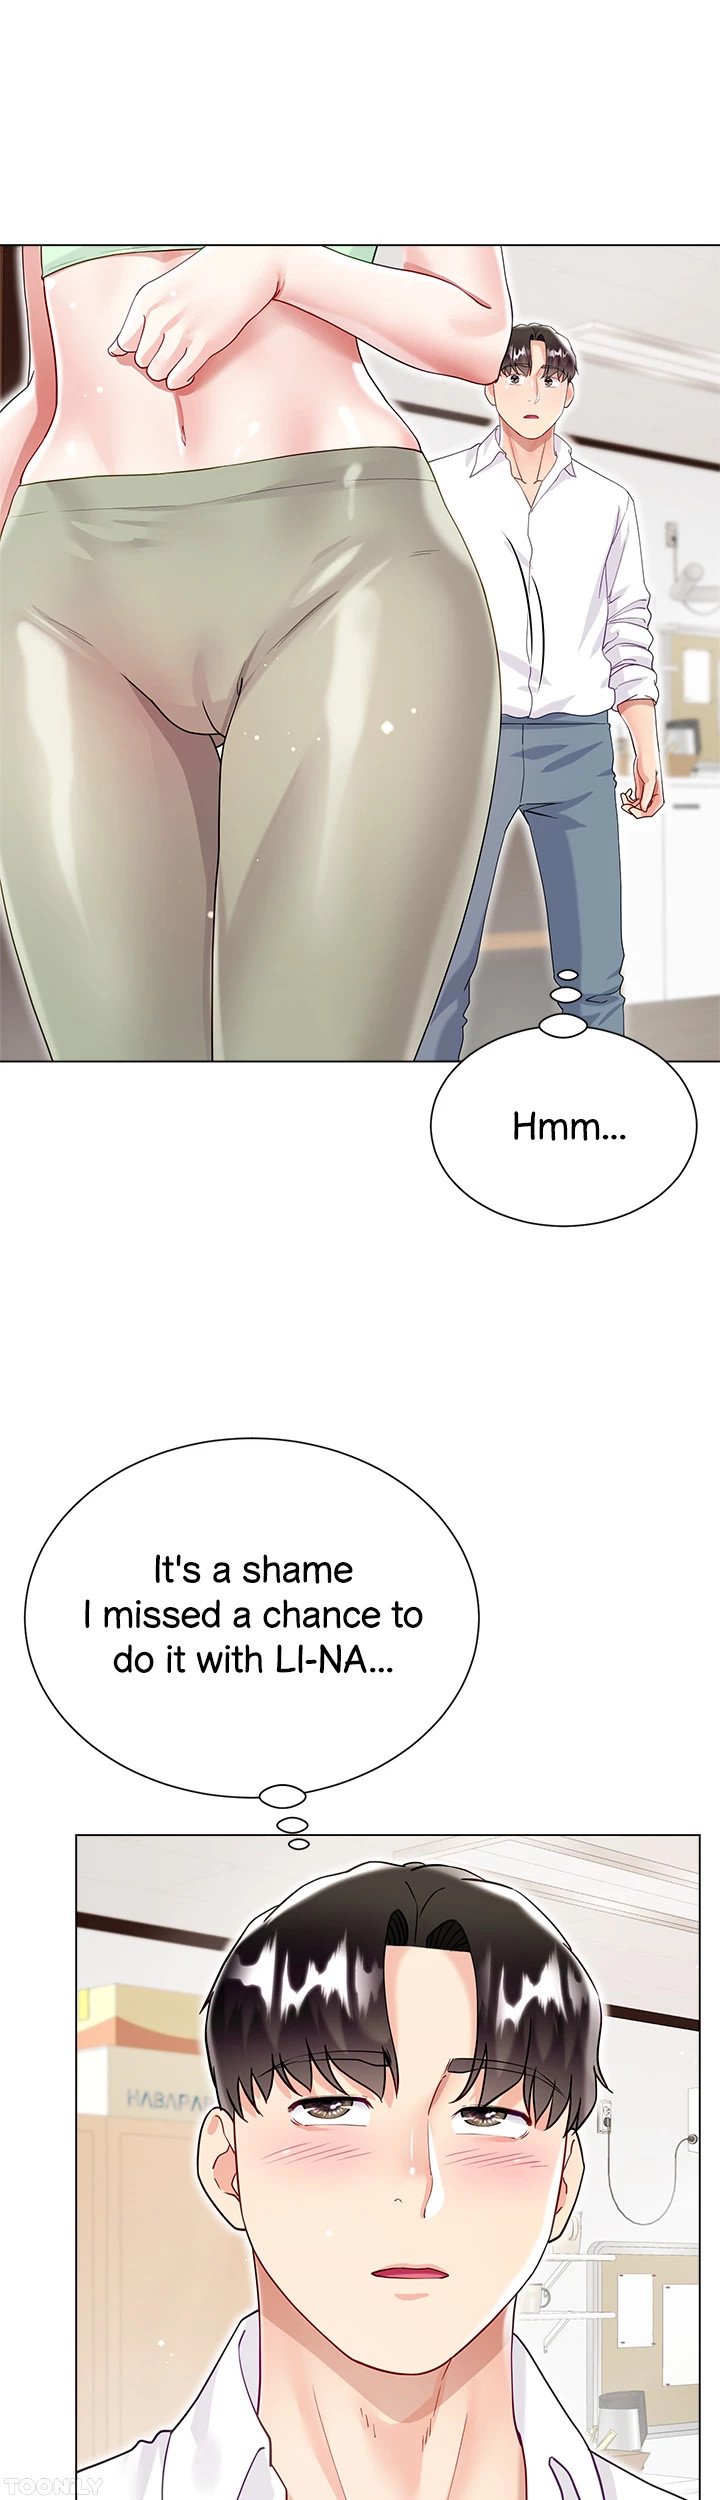 my-sister-in-laws-skirt-chap-45-42